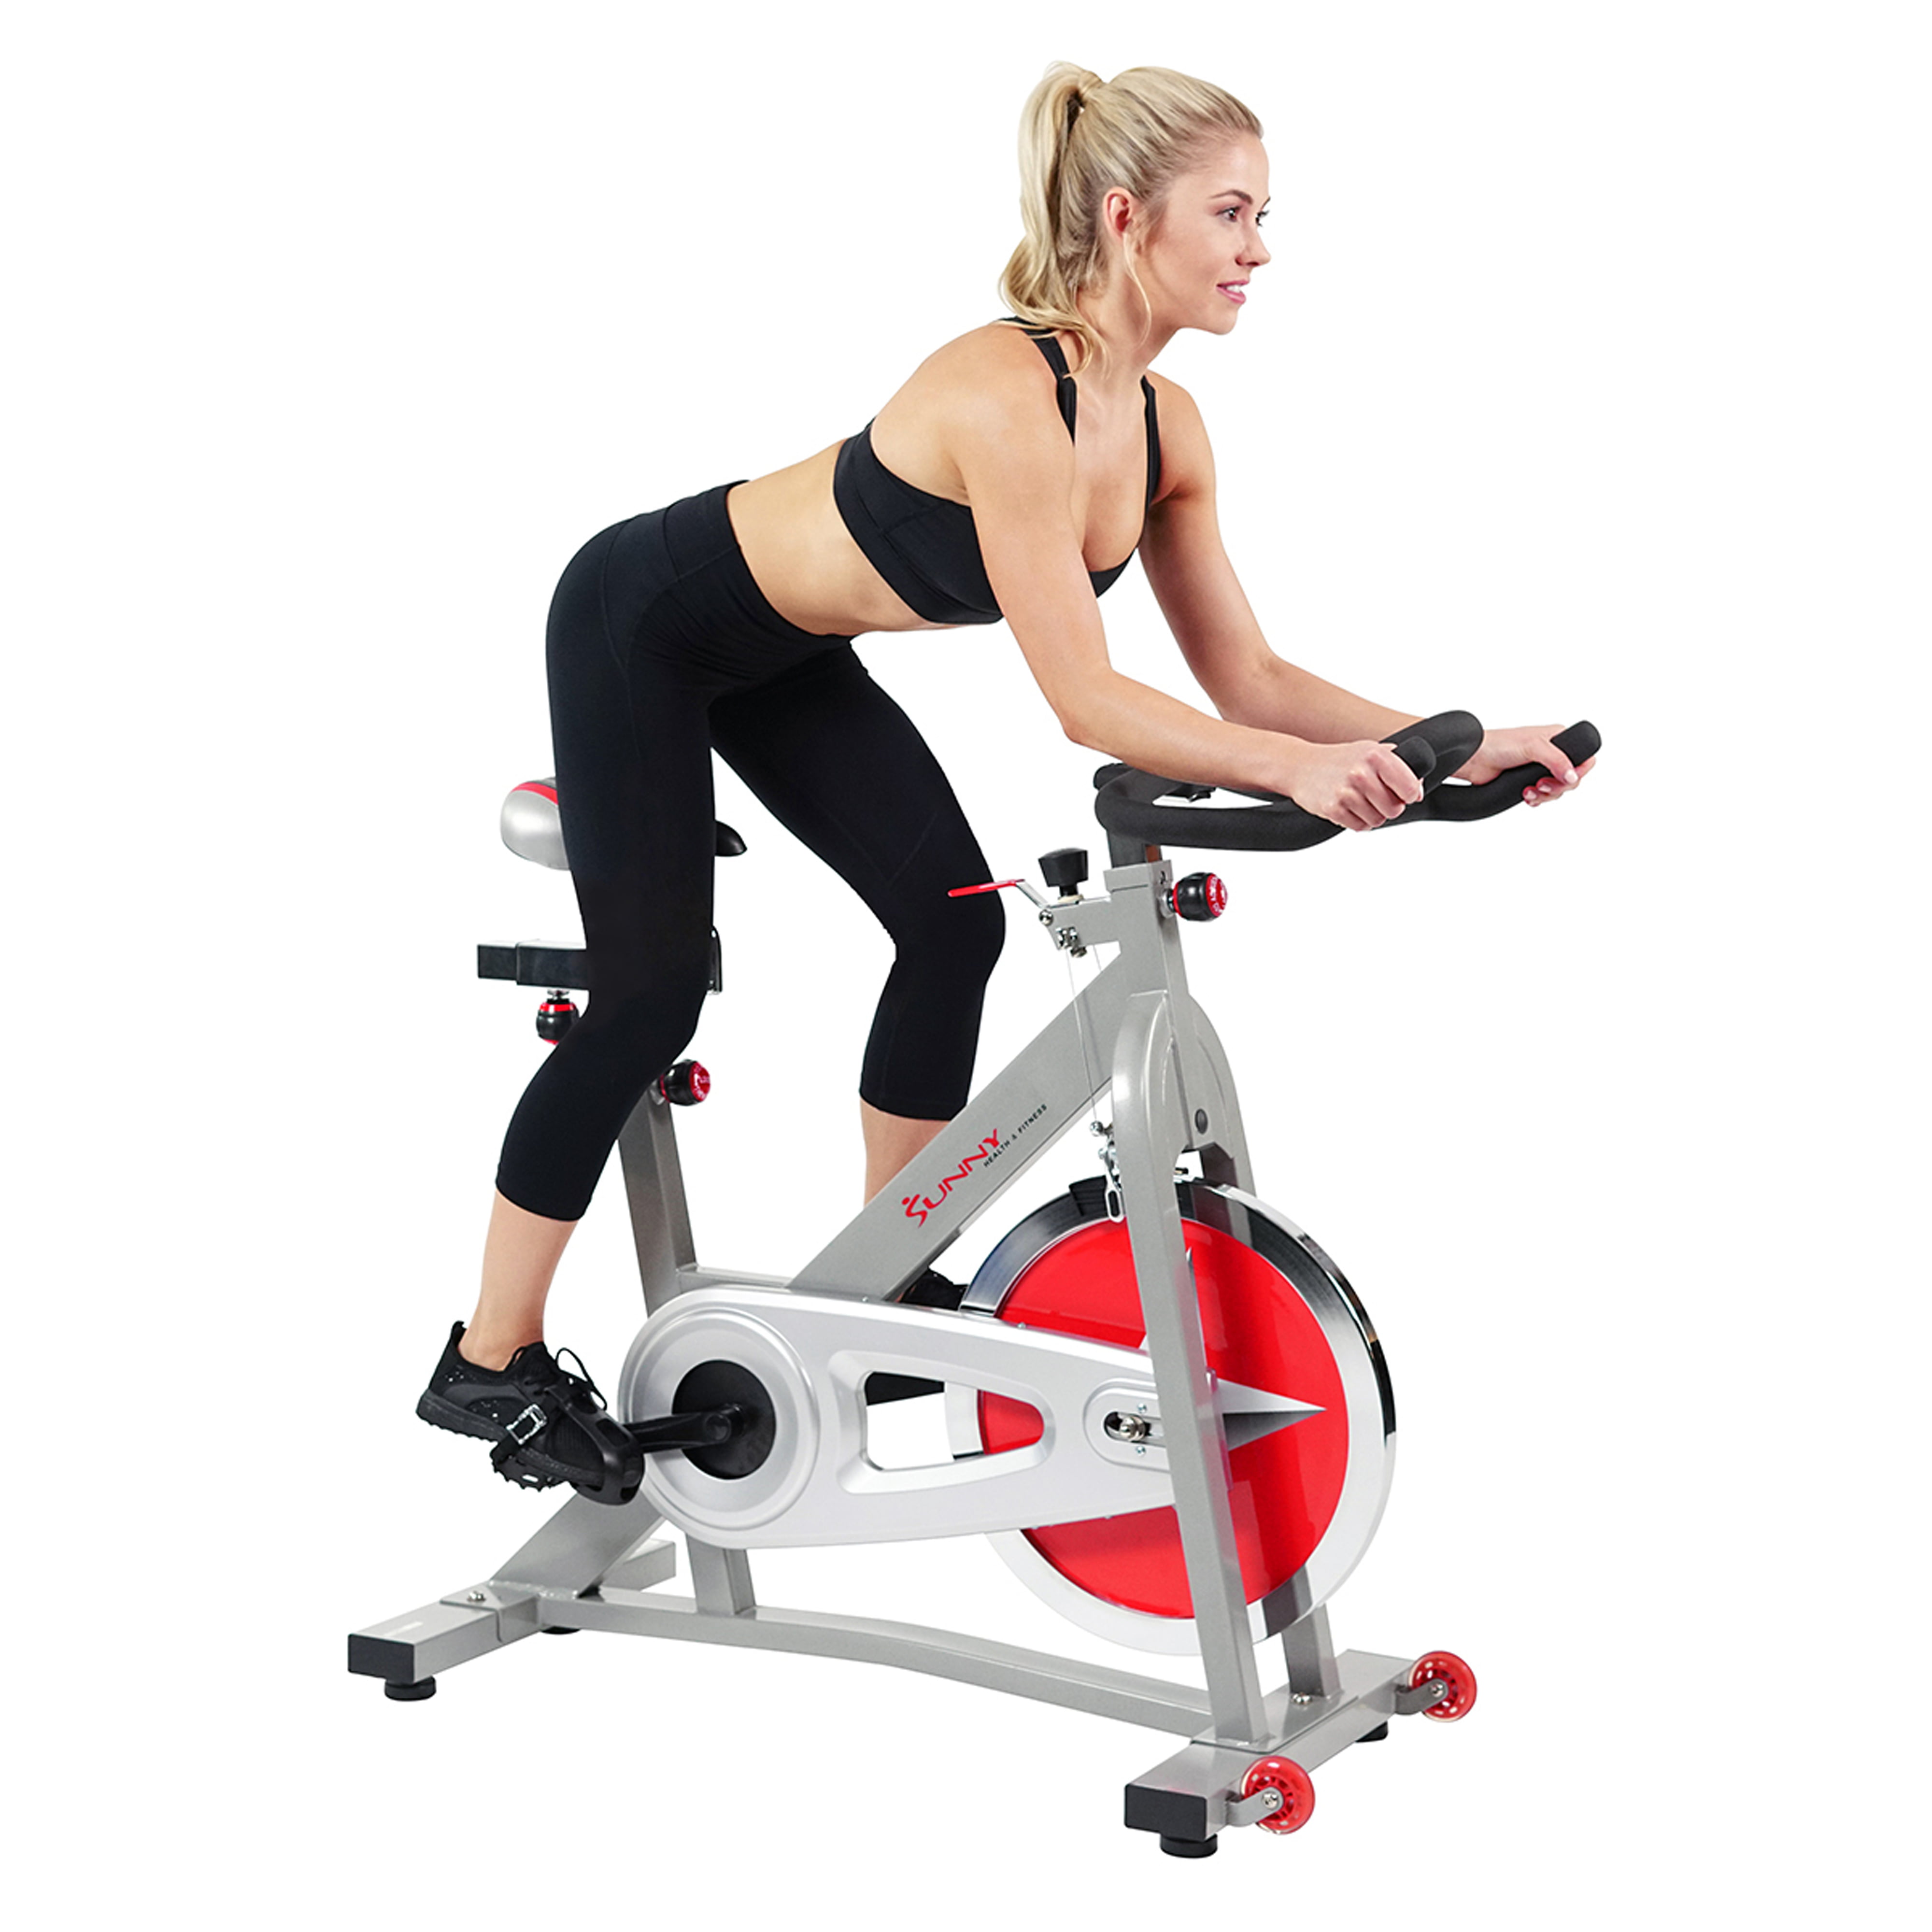 Sunny Health & Fitness Stationary Chain Drive 40 lb Flywheel Pro Indoor Cycling Exercise Bike Trainer, Workout Machine, SF-B901 - image 7 of 9